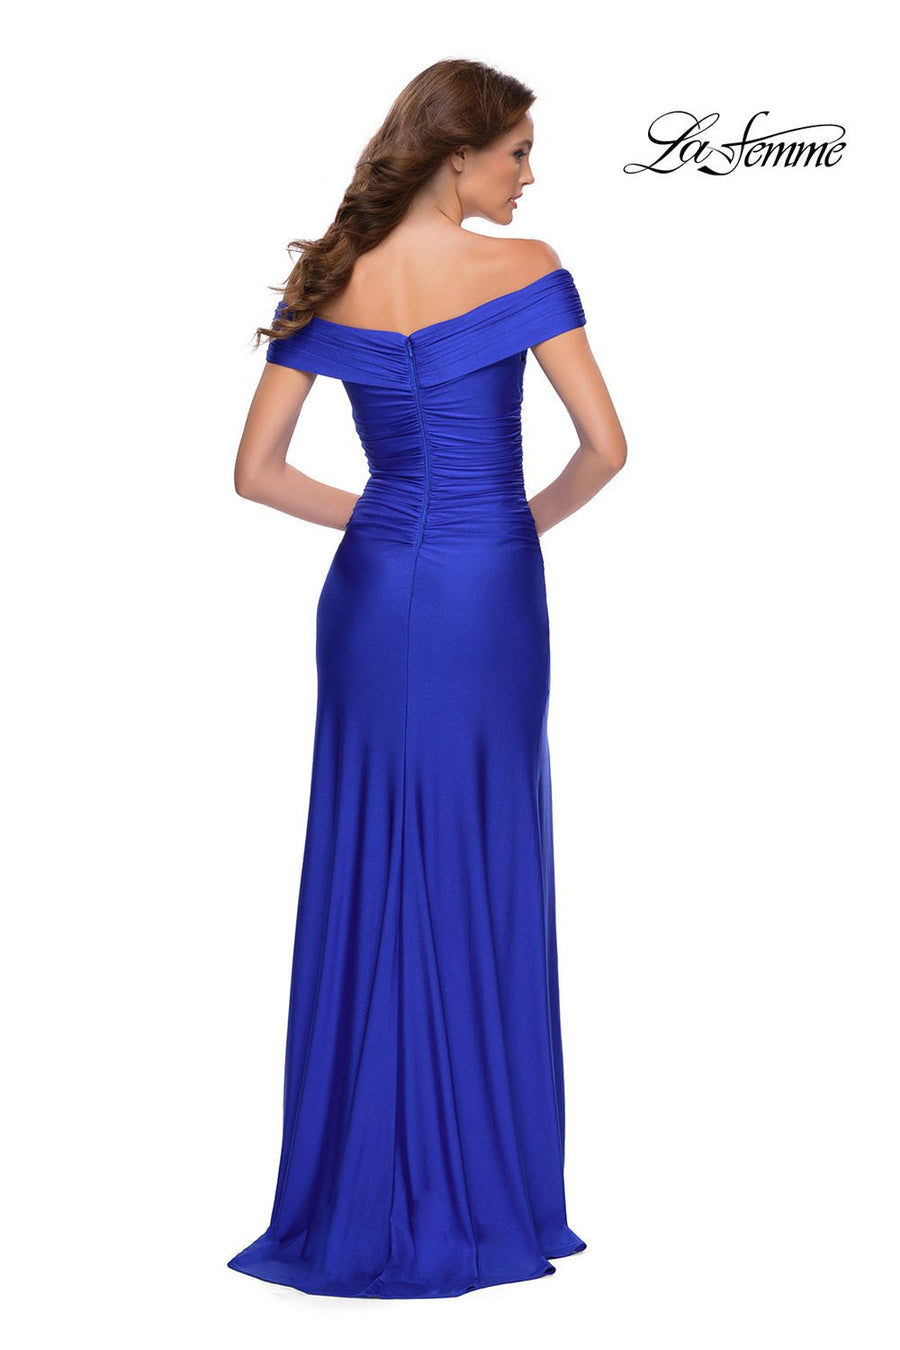 La Femme 29781 prom dress images.  La Femme 29781 is available in these colors: Black, Red, Royal Blue.